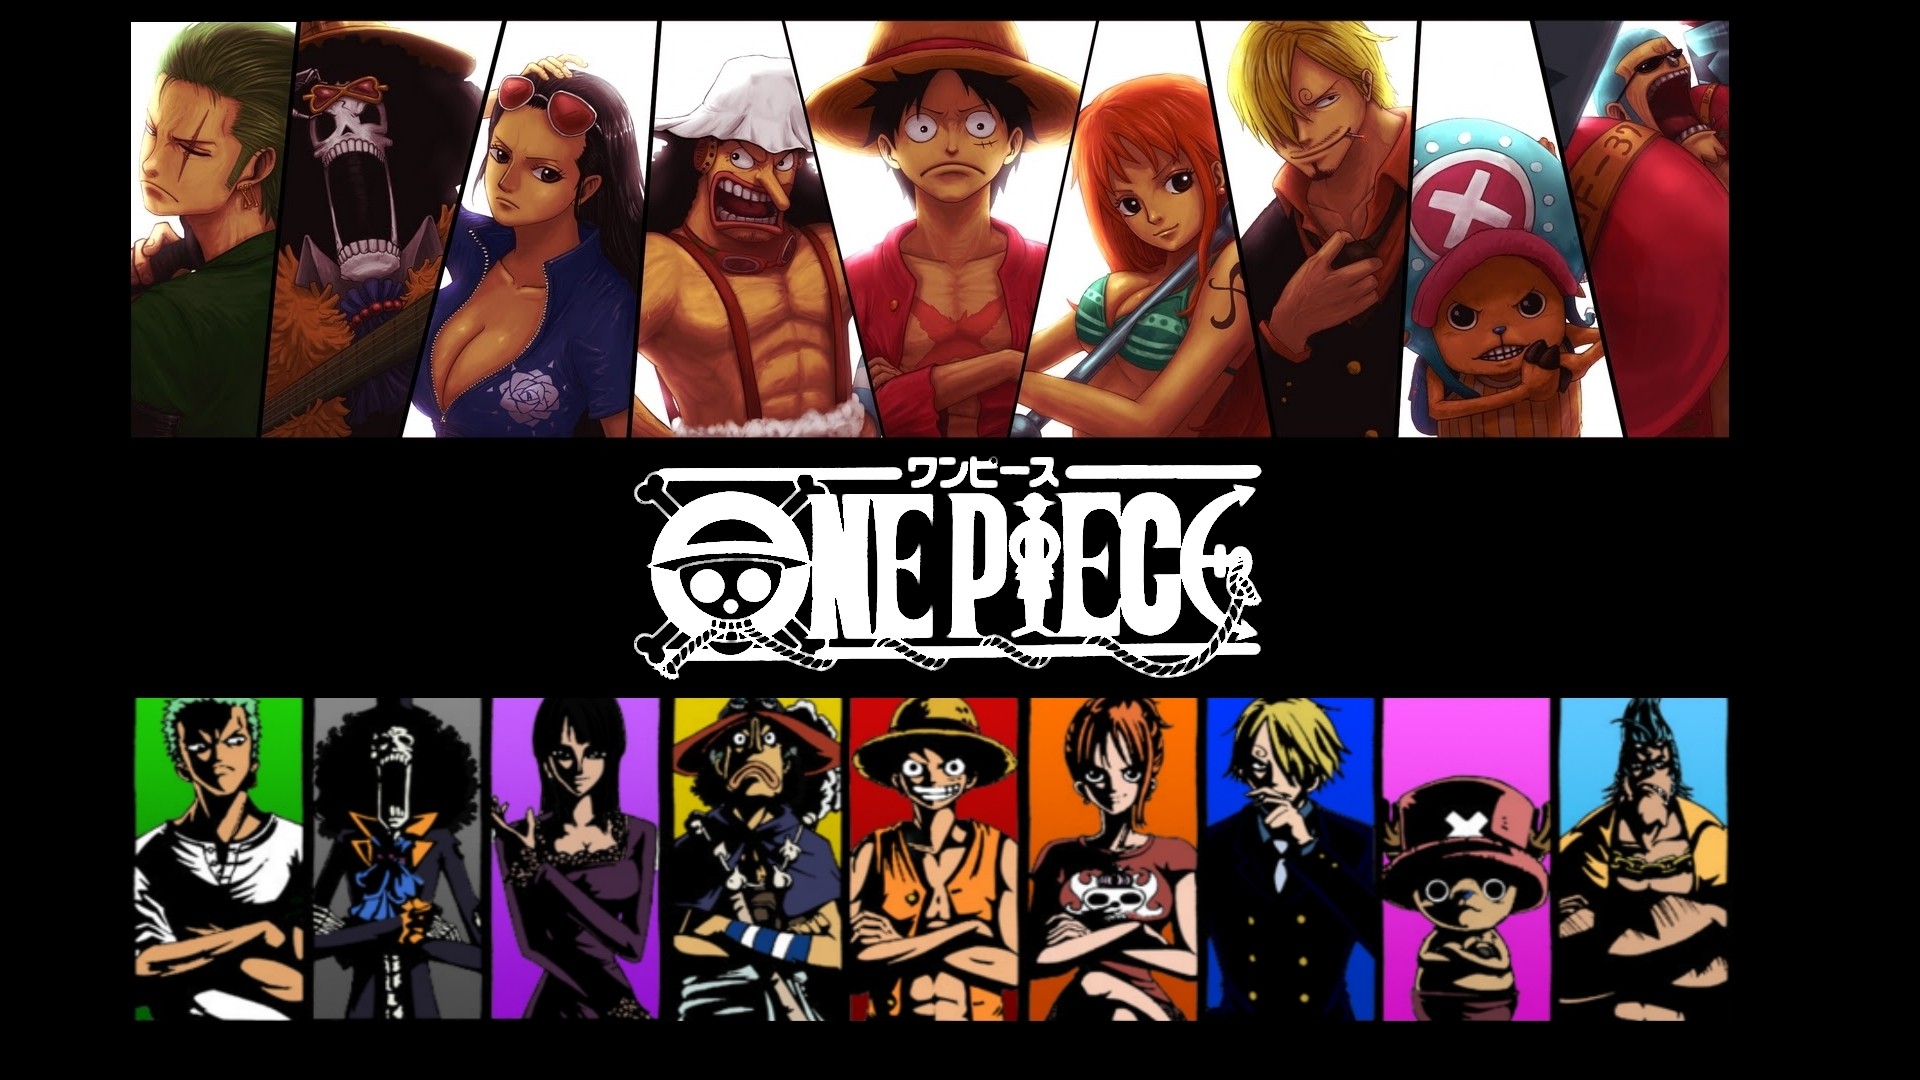 Image   One Piece Manga Wallpapers HD 1080pjpg   ShadowLand Online